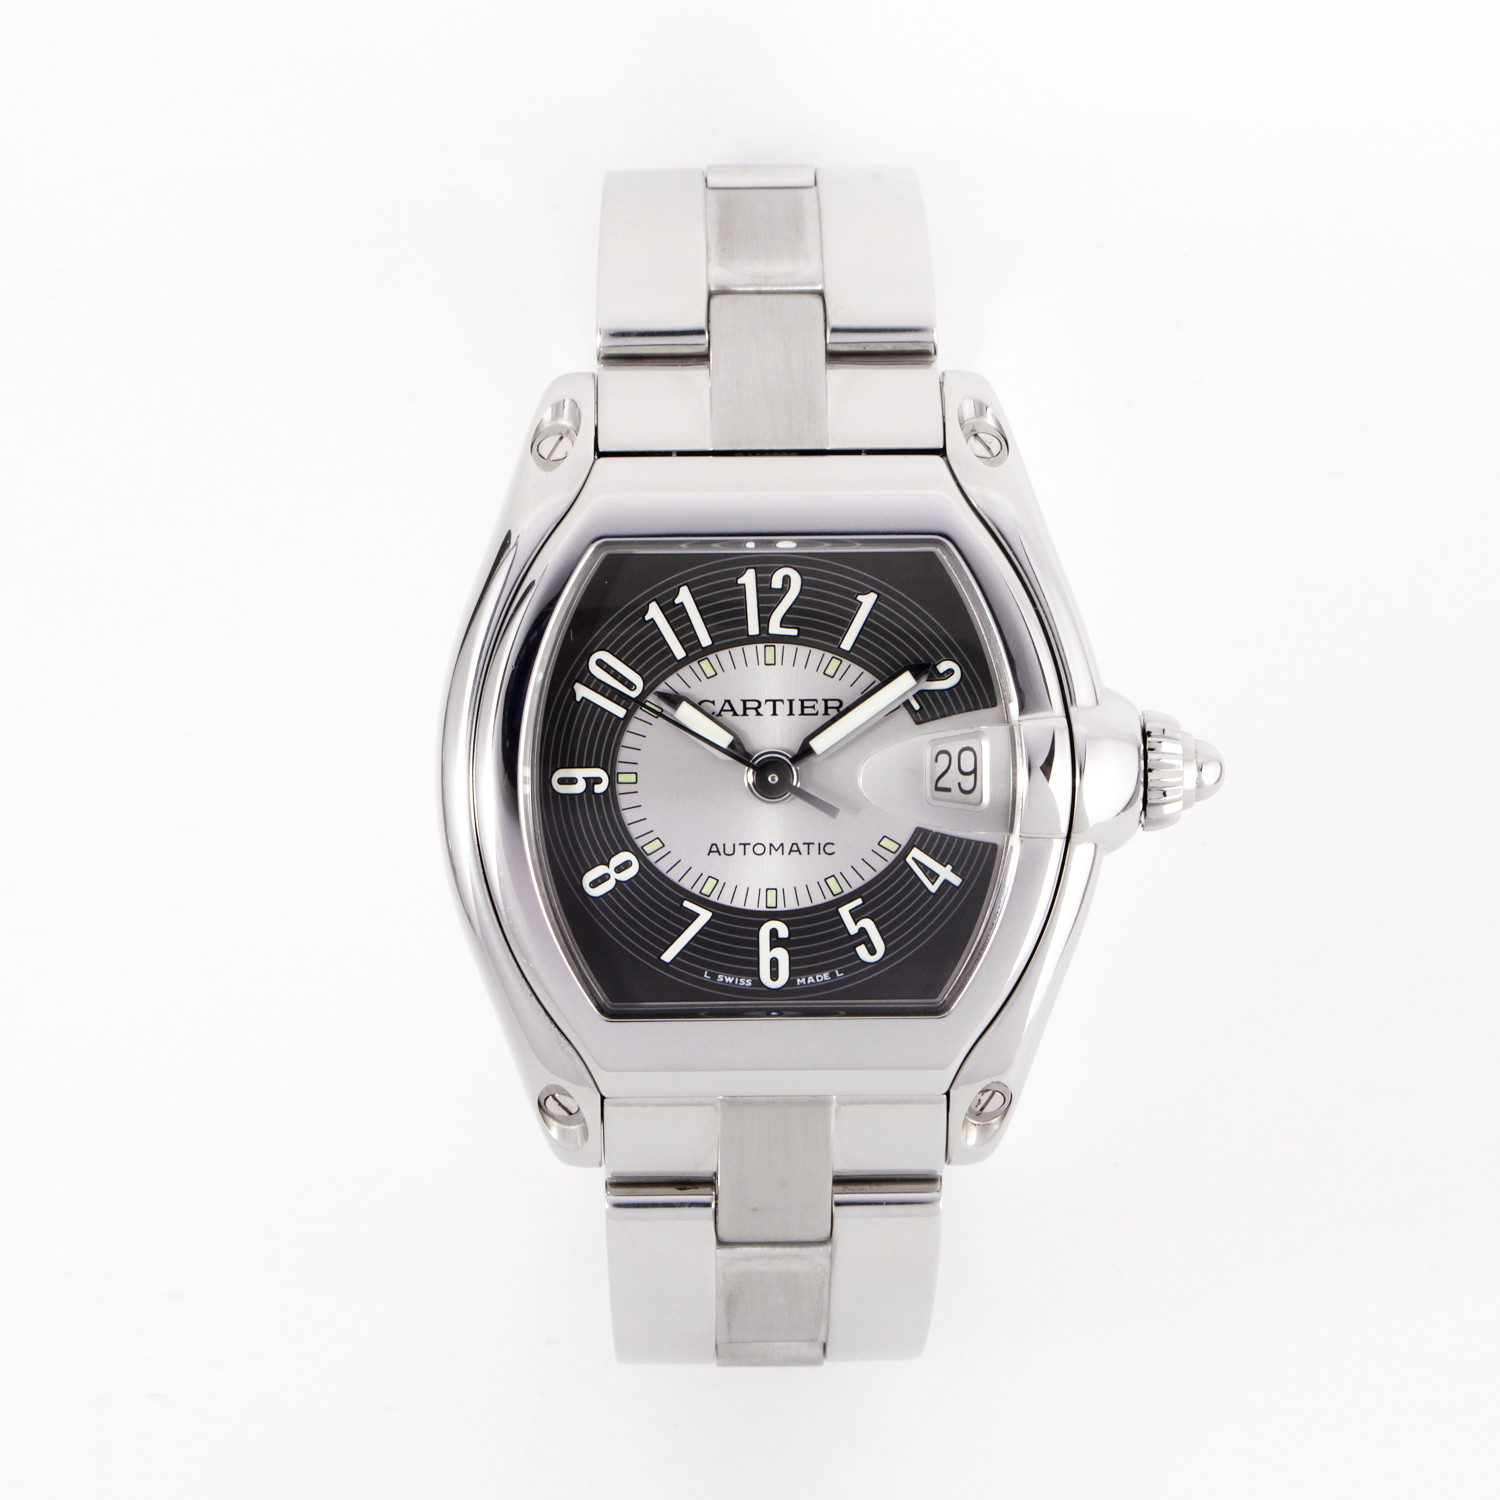 Cartier Roadster // CNMGL23 // c.2000s - Vintage Watches - Touch of Modern